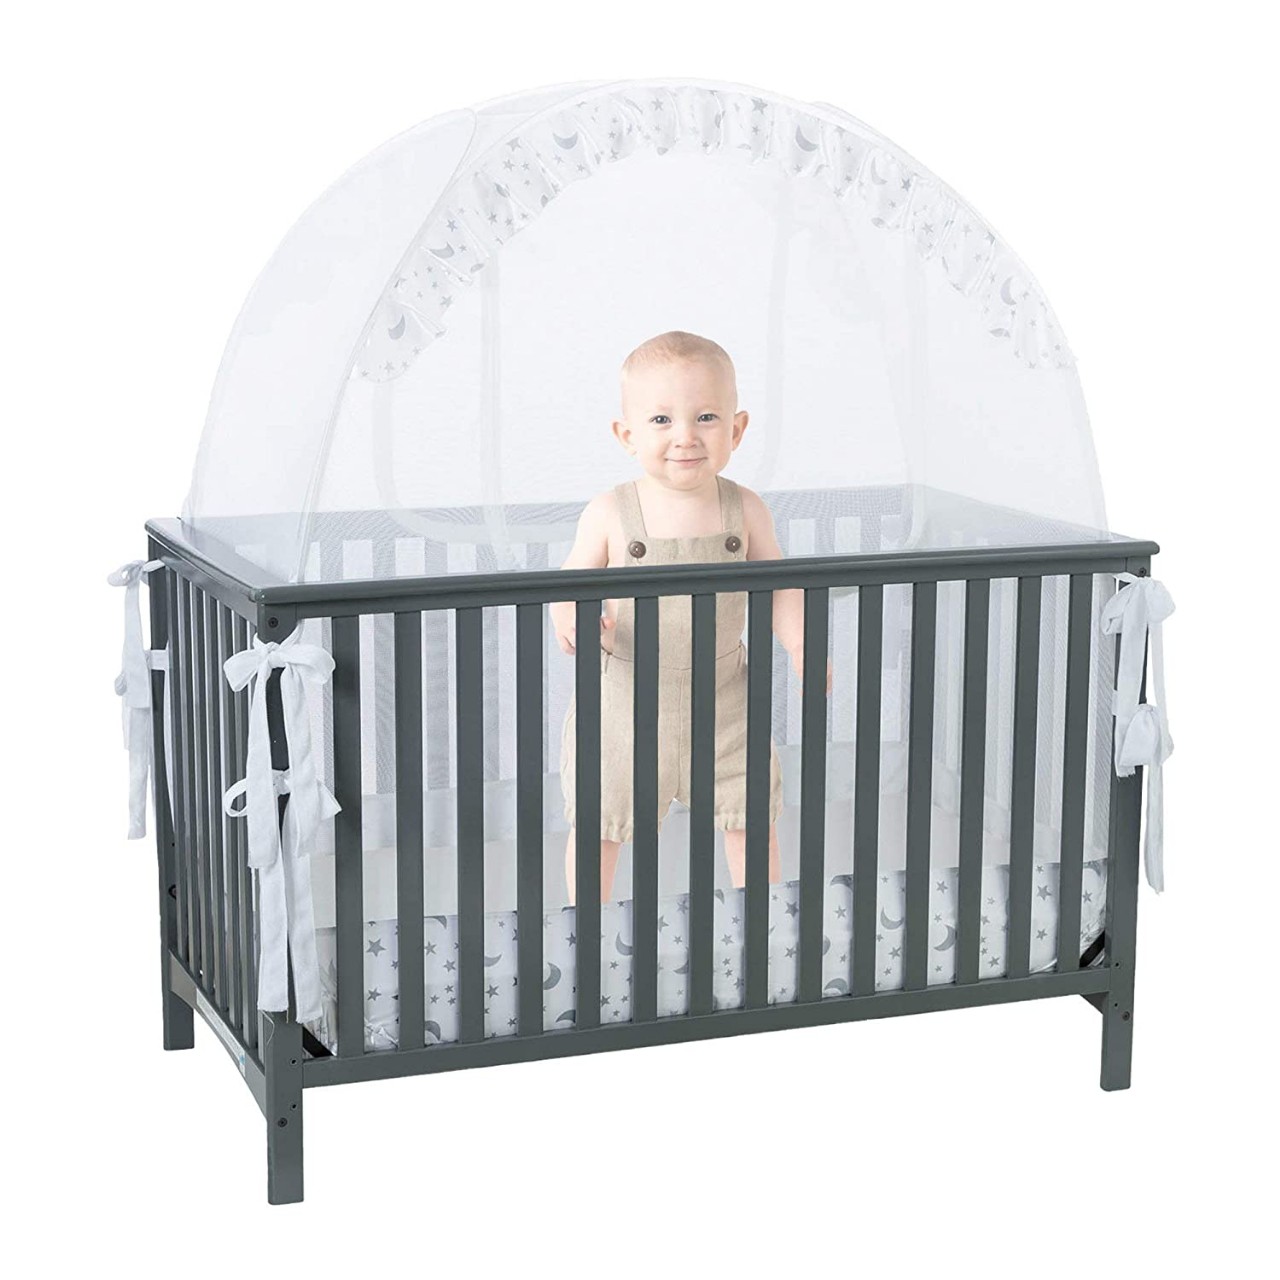 Pro Baby Safety Pop up Crib Tent: Premium Baby Bed Canopy Netting Cover - See Through Mesh Nursery